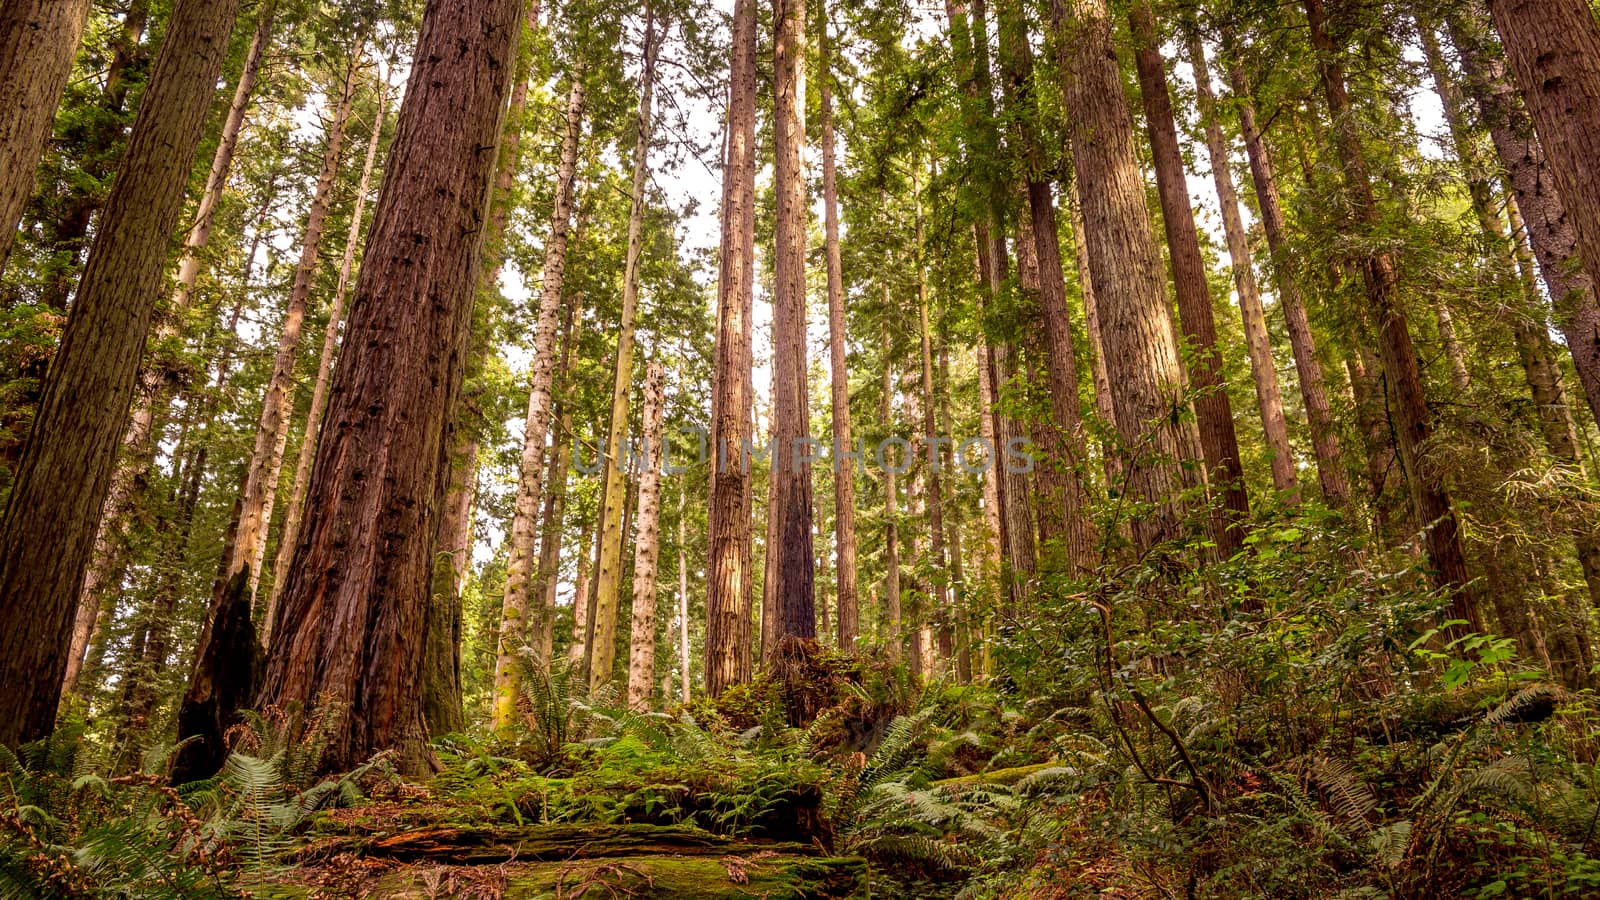 A beautiful redwood forest in Arcata, California, USA.